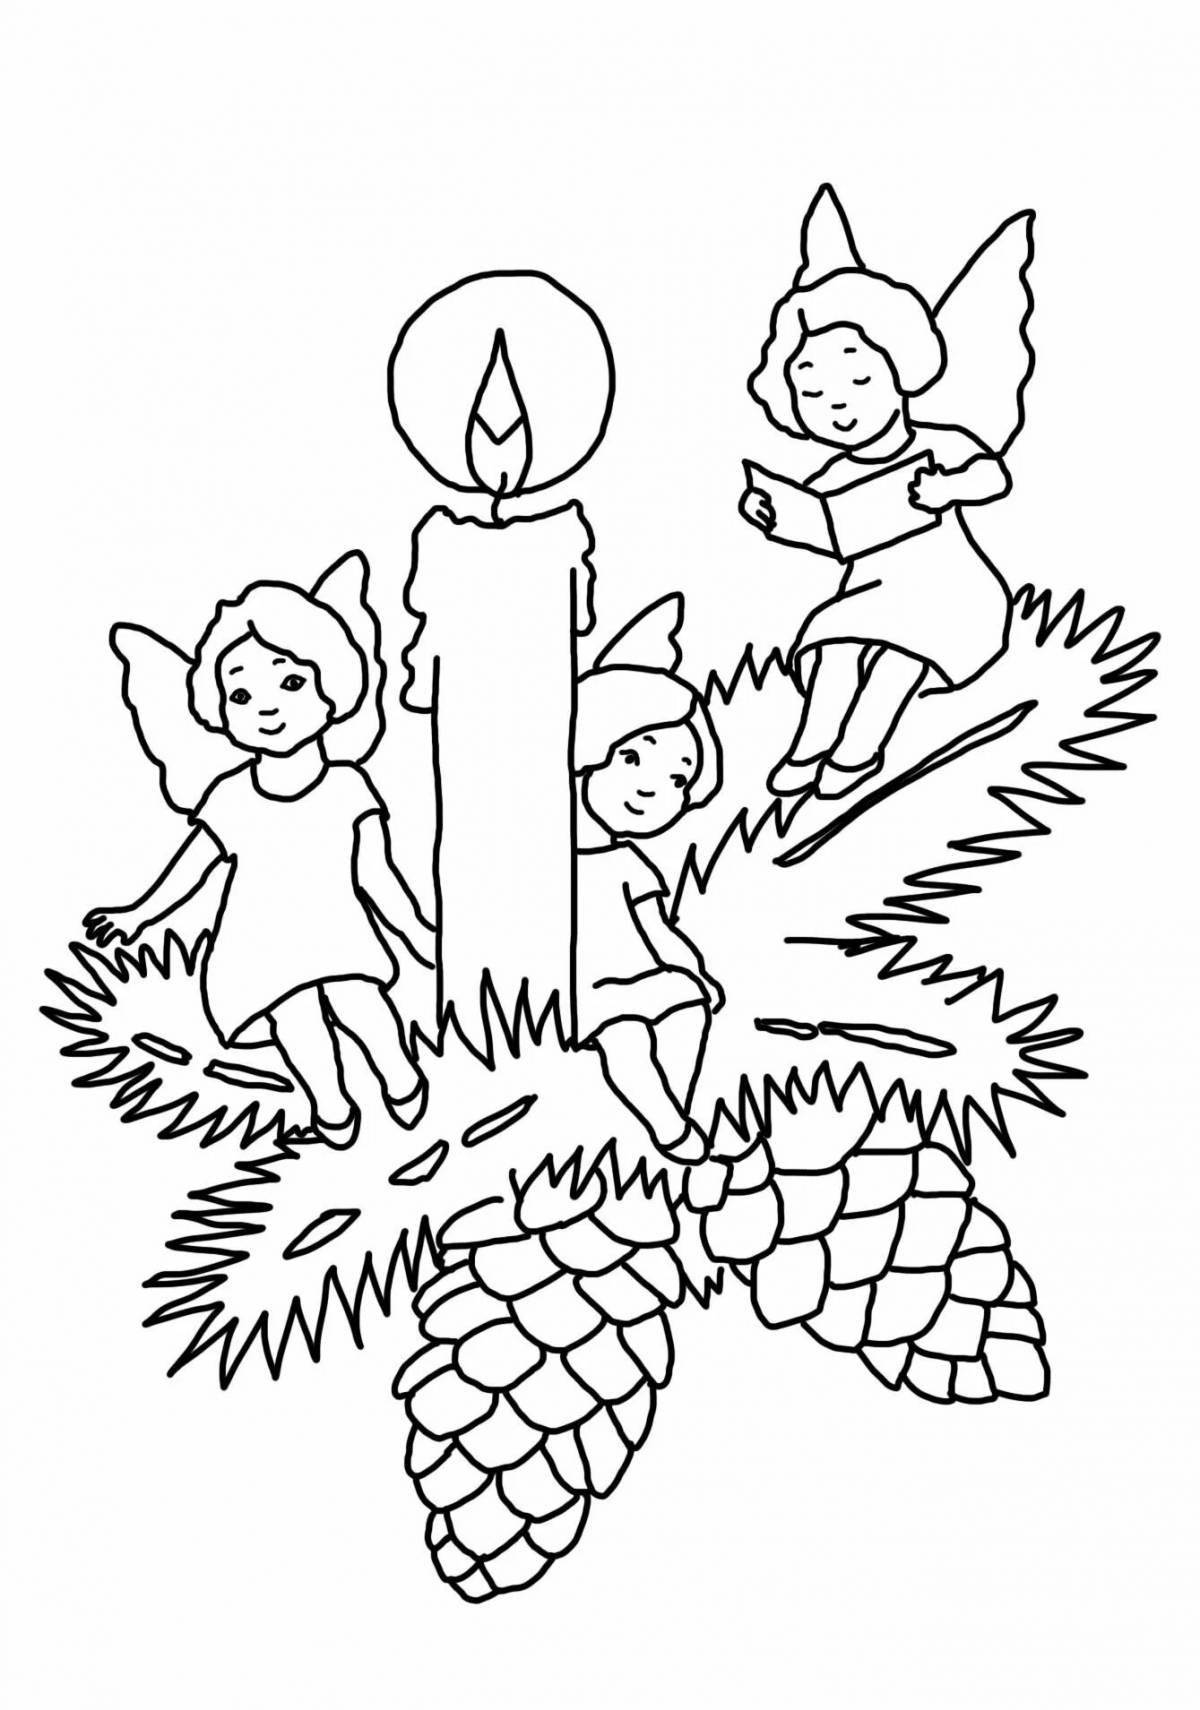 A fun Christmas coloring book for 3-4 year olds